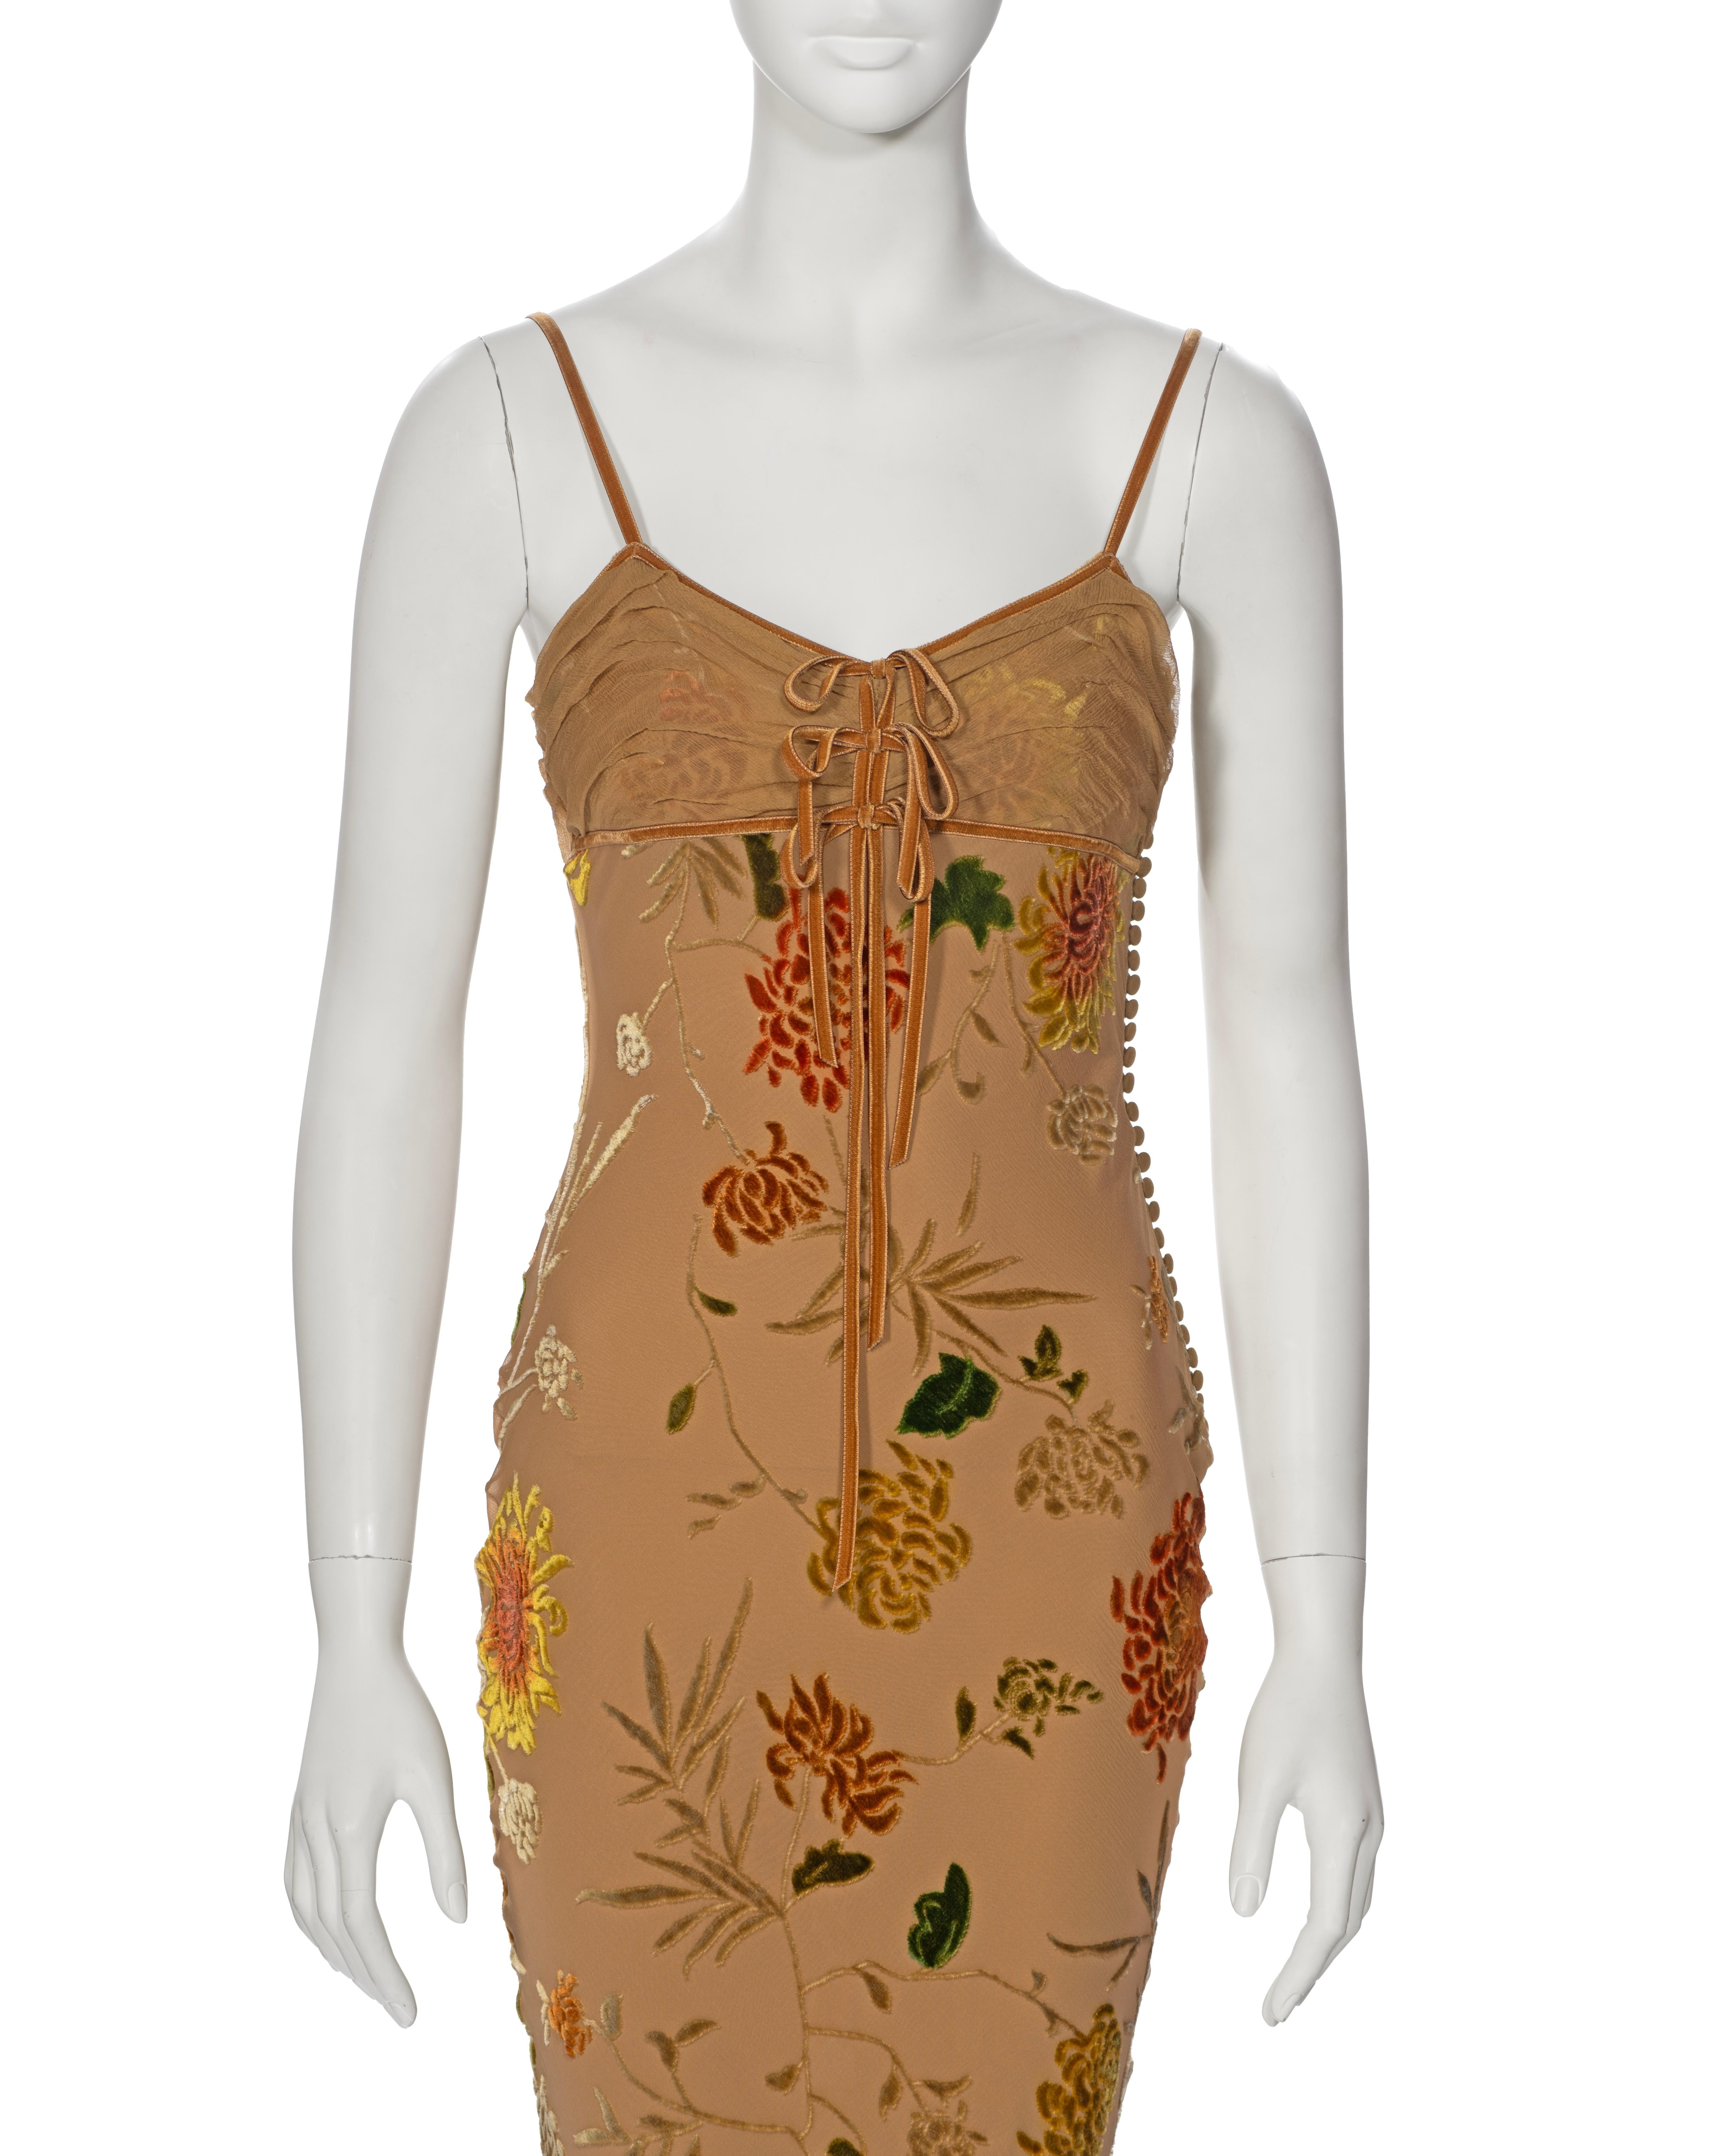  Christian Dior by John Galliano Tan Floral Velvet Devoré Maxi Dress, ss 2006 In Excellent Condition For Sale In London, GB